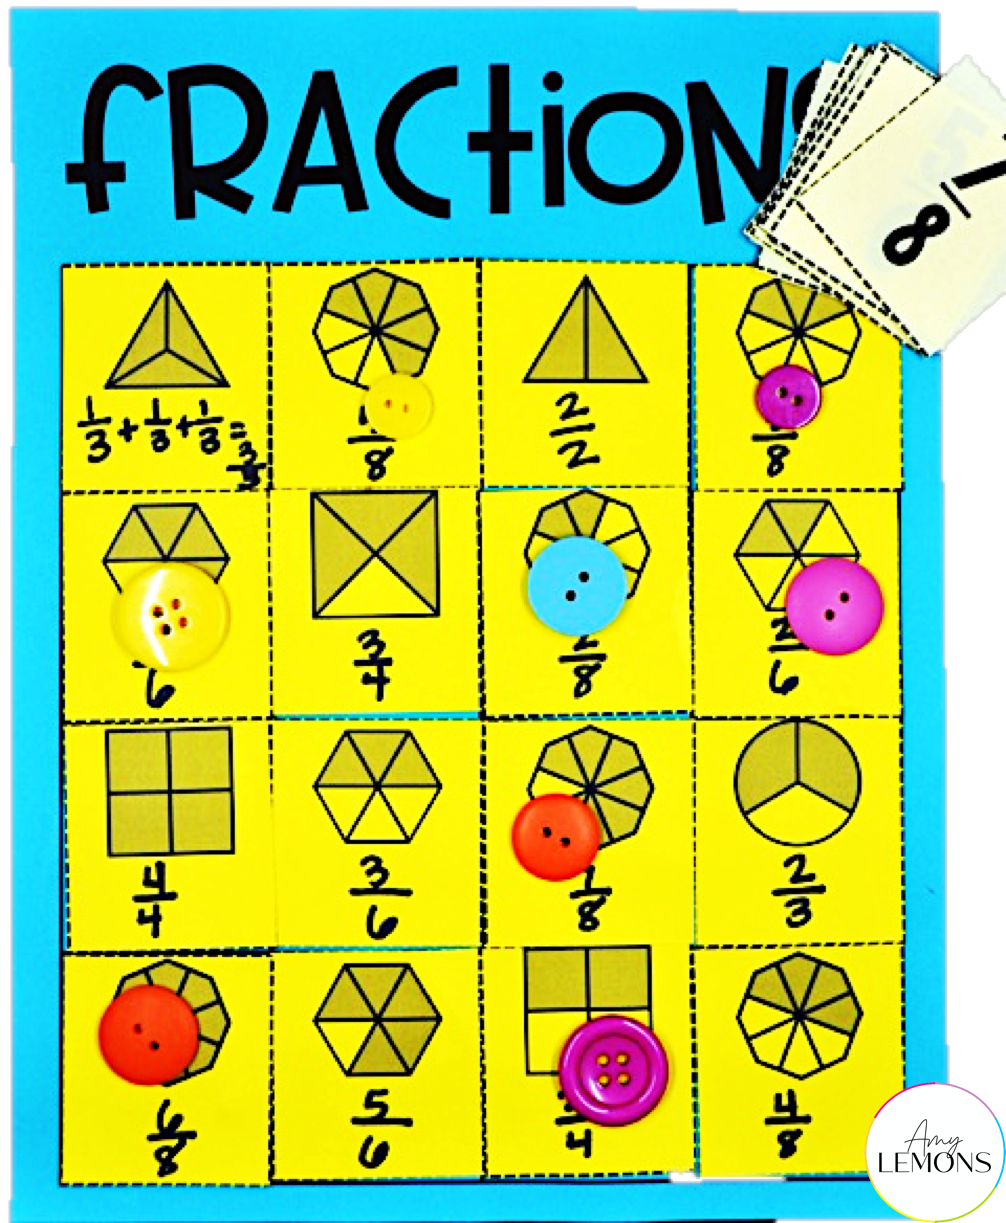 Fraction bingo board for students to identify fractions.